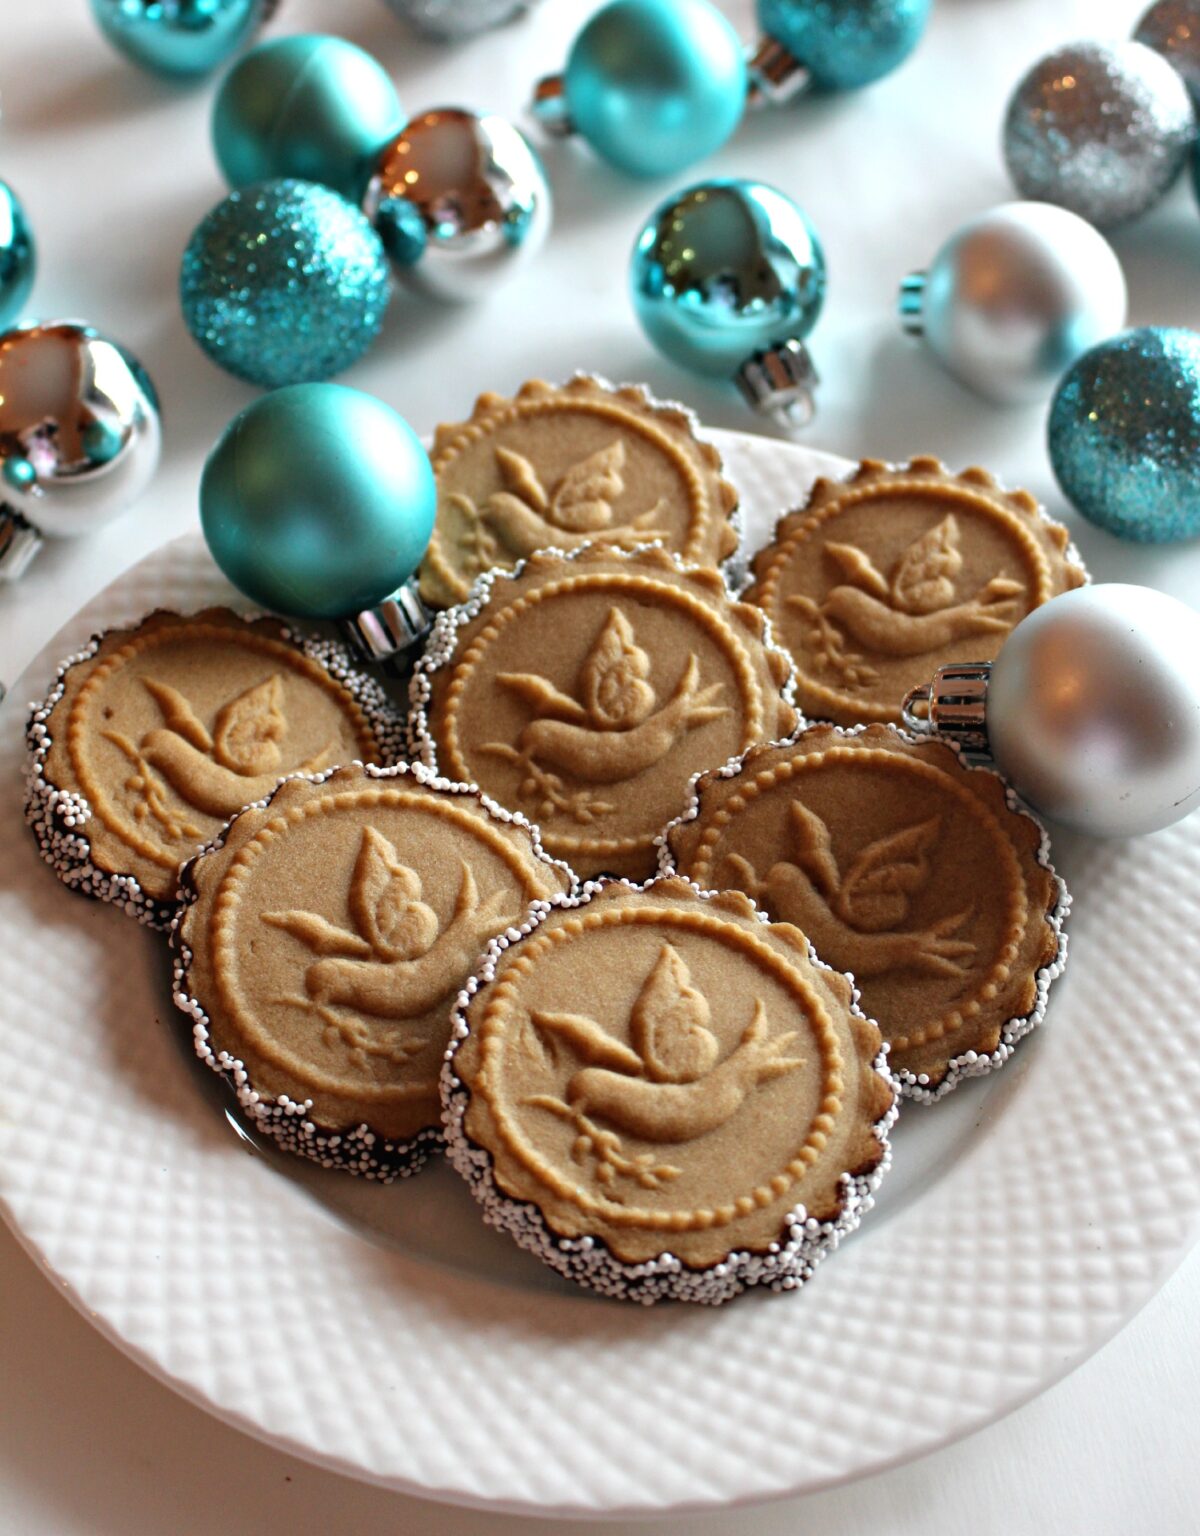 Round Honey Gingerbread Cookieswith scalloped edges, stamped with a dove.